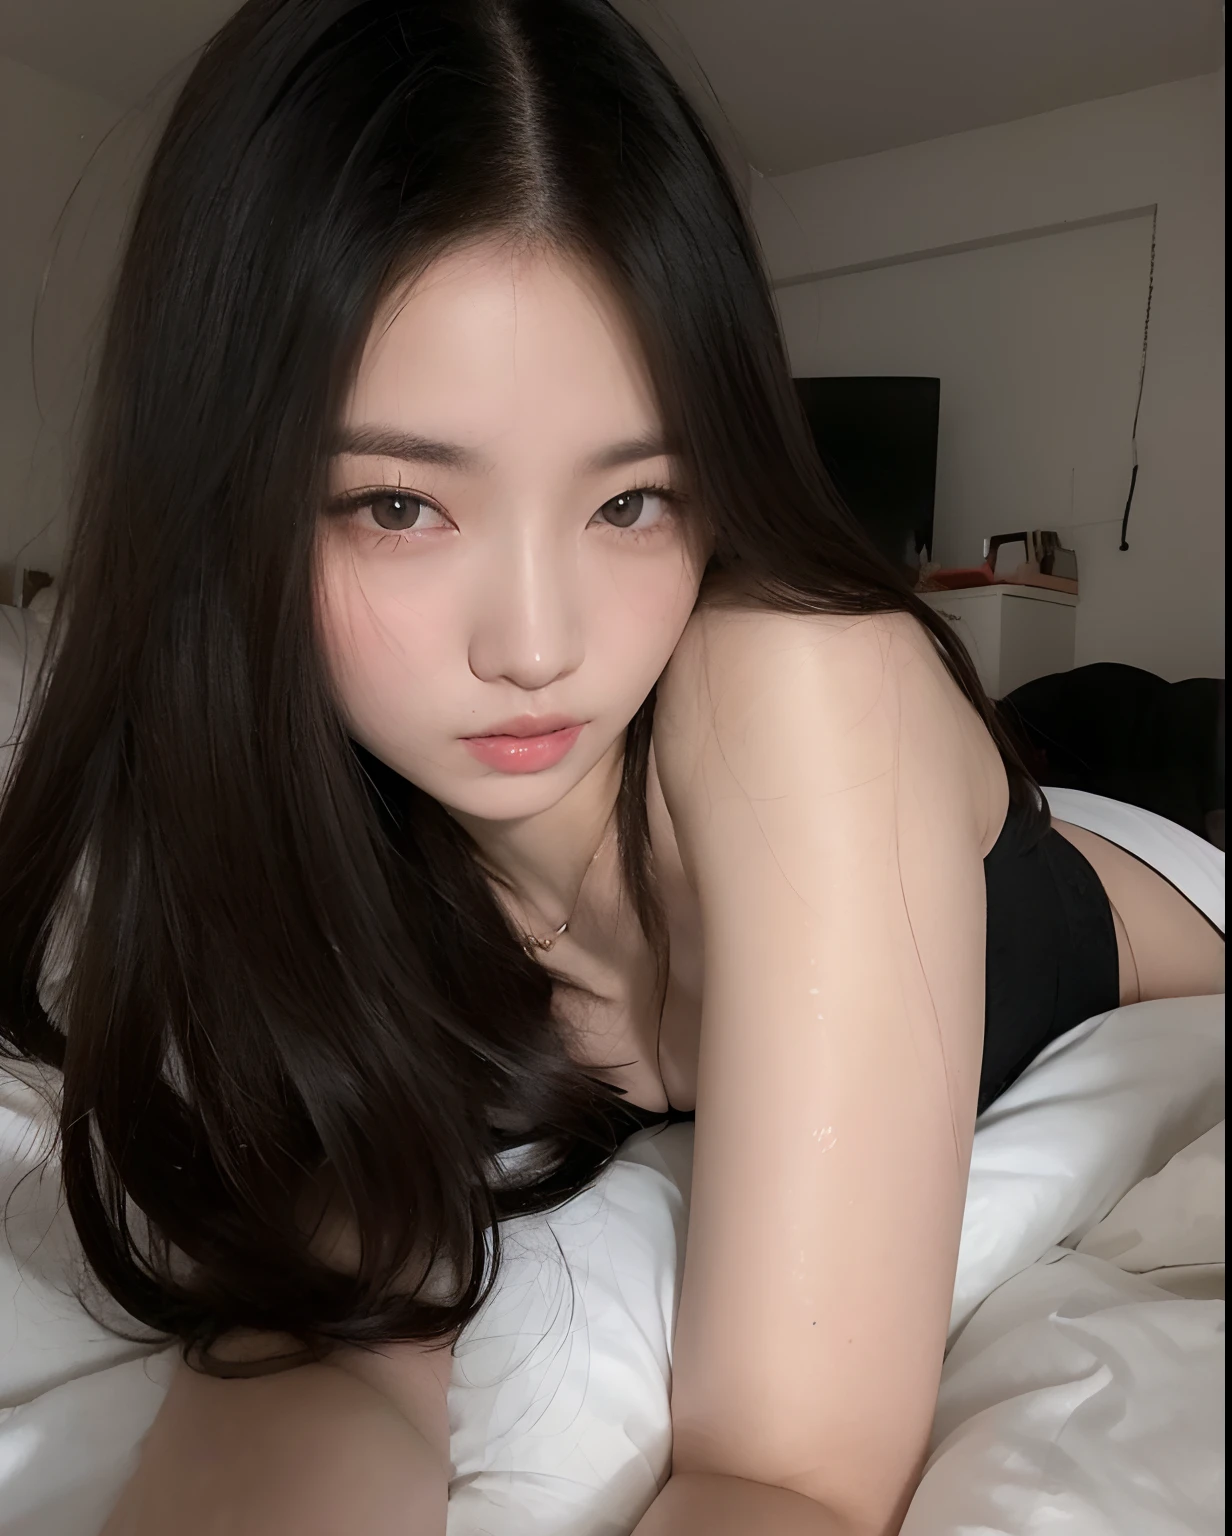 Araffe Asian woman with black hair and 32 inch size breasts posing for a photo, pale milky white porcelain skin, xintong chen, ulzzang, wenfei ye, pale porcelain white skin, 32 inches size breasts, pale snow white skin, korean girl, Chengyou Liu, gorgeous chinese model, instagram model, xision wu,  Chinesa, Heonhwa Choe, 🤤 portrait of , well done makeup, eyes locked, rosto angelical.